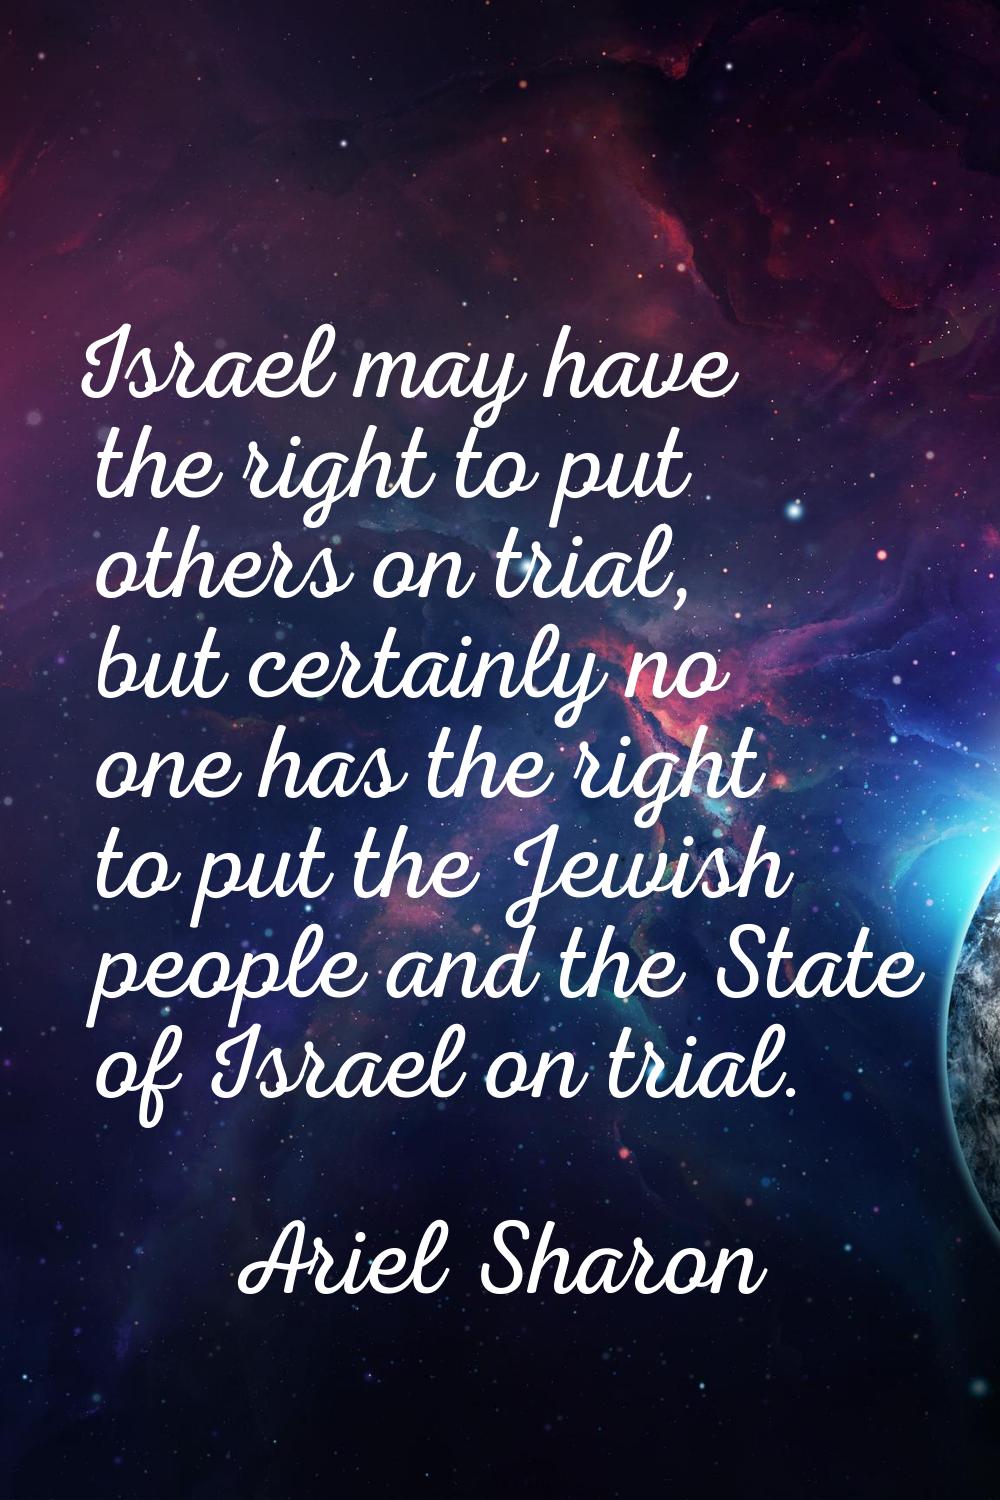 Israel may have the right to put others on trial, but certainly no one has the right to put the Jew